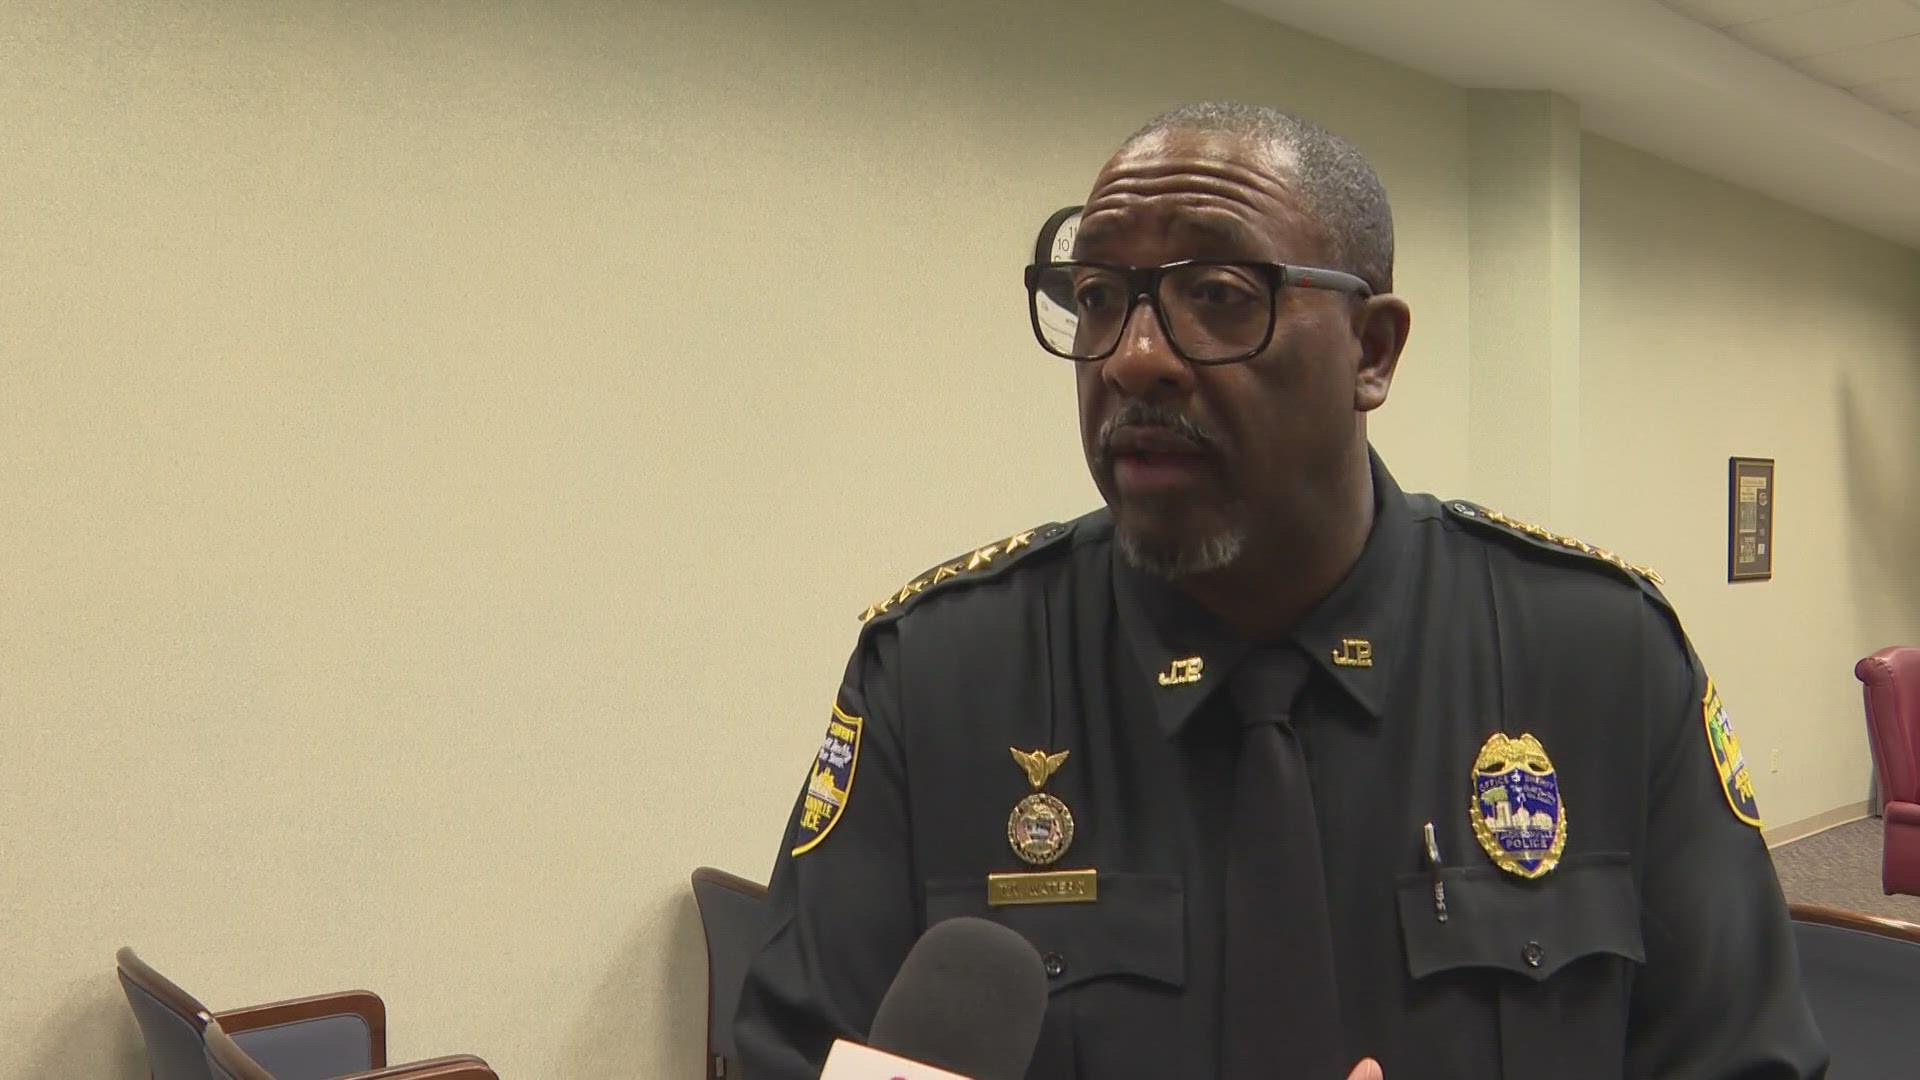 When asked if there is a threat of violence to the public, the Sheriff said 'gang life' and criminal activity is the main issues driving violence.